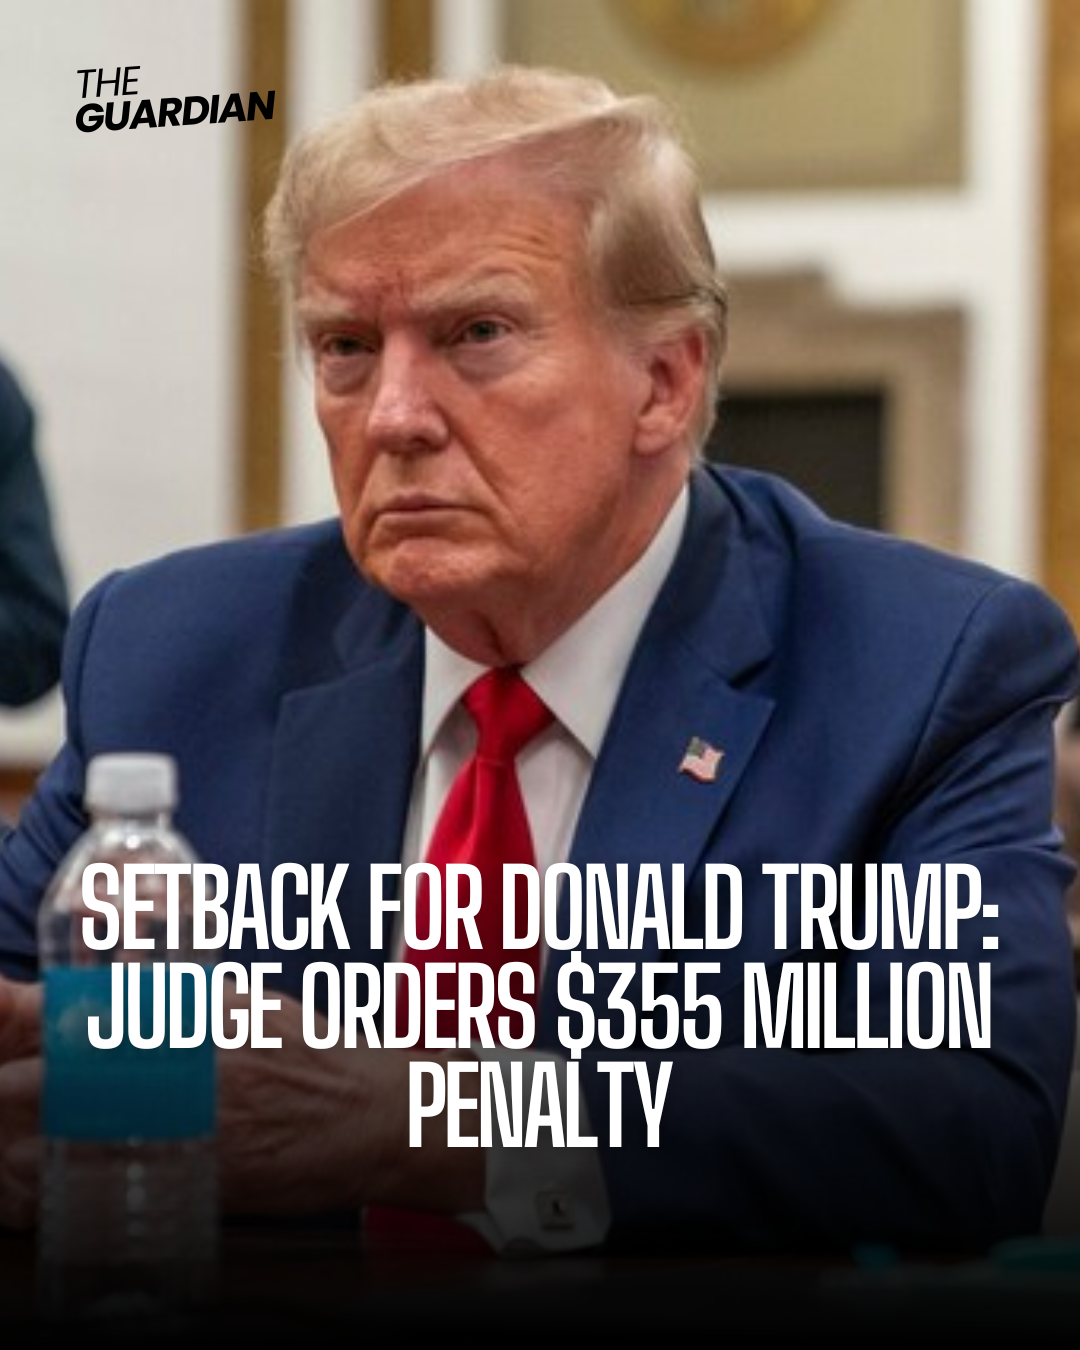 Donald Trump suffered a huge legal loss on Friday, when a New York judge ruled against him and his enterprises.